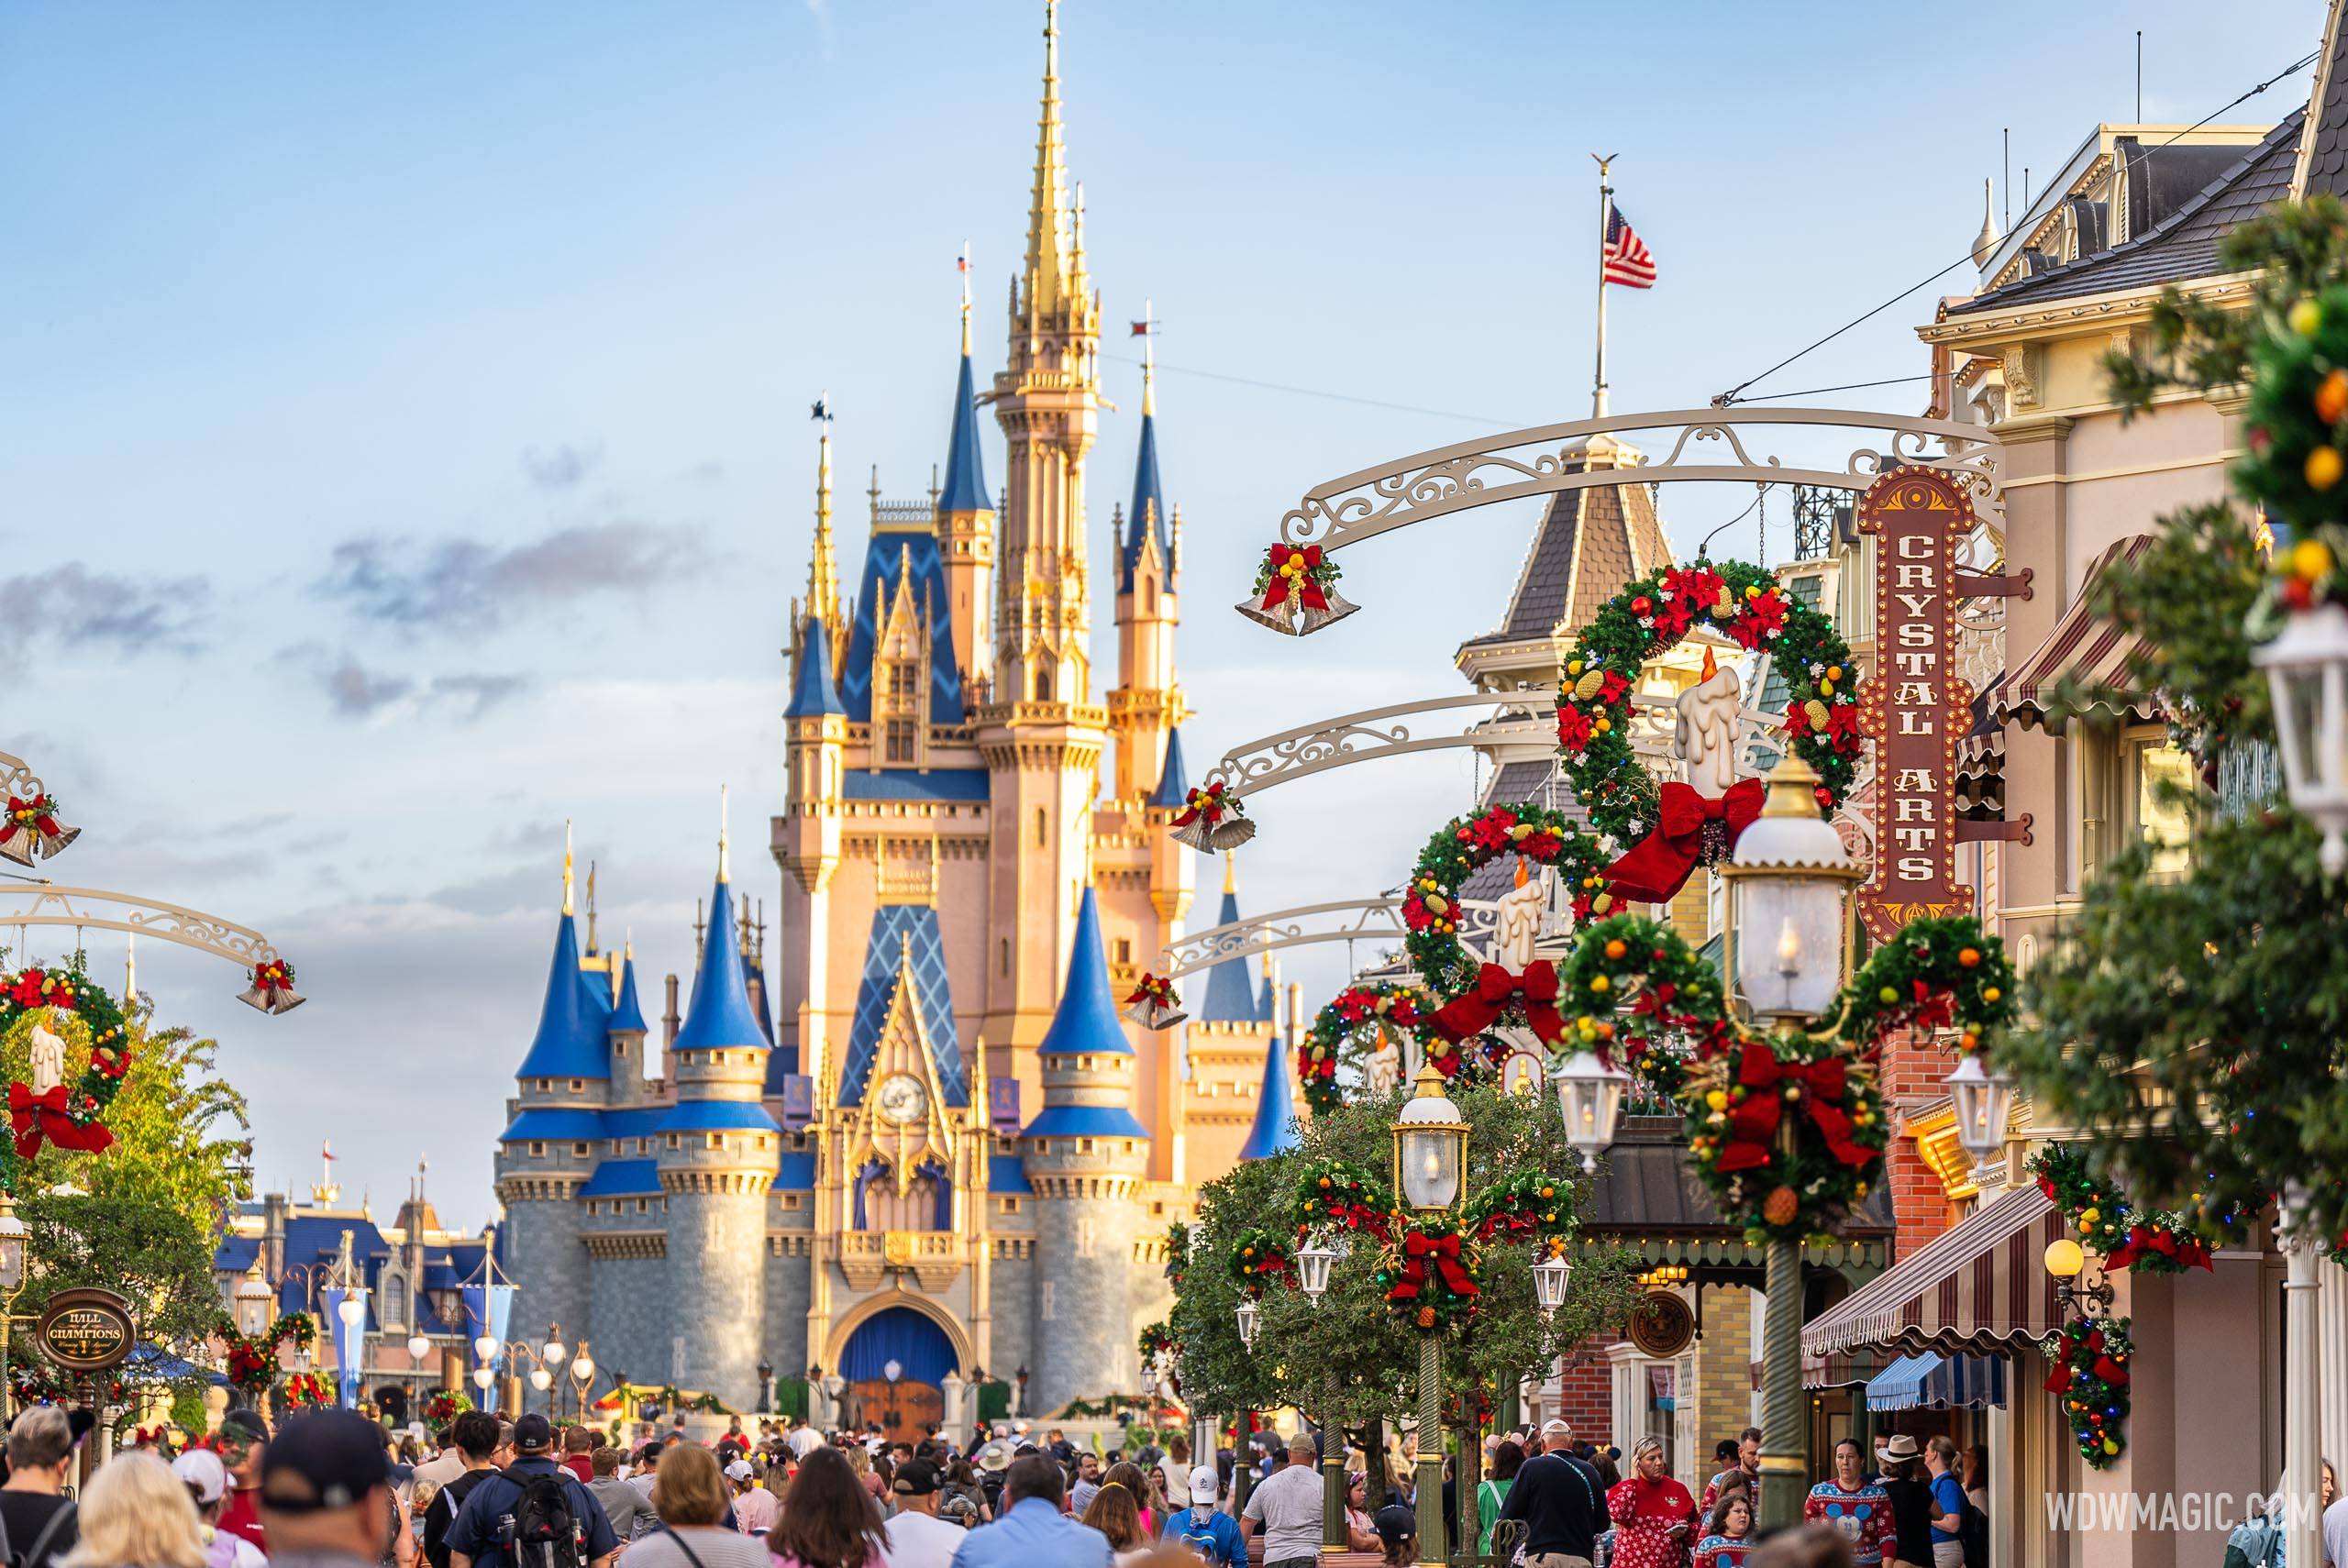 Six days are now at capacity for Walt Disney World Annual Passholders at Magic Kingdom,